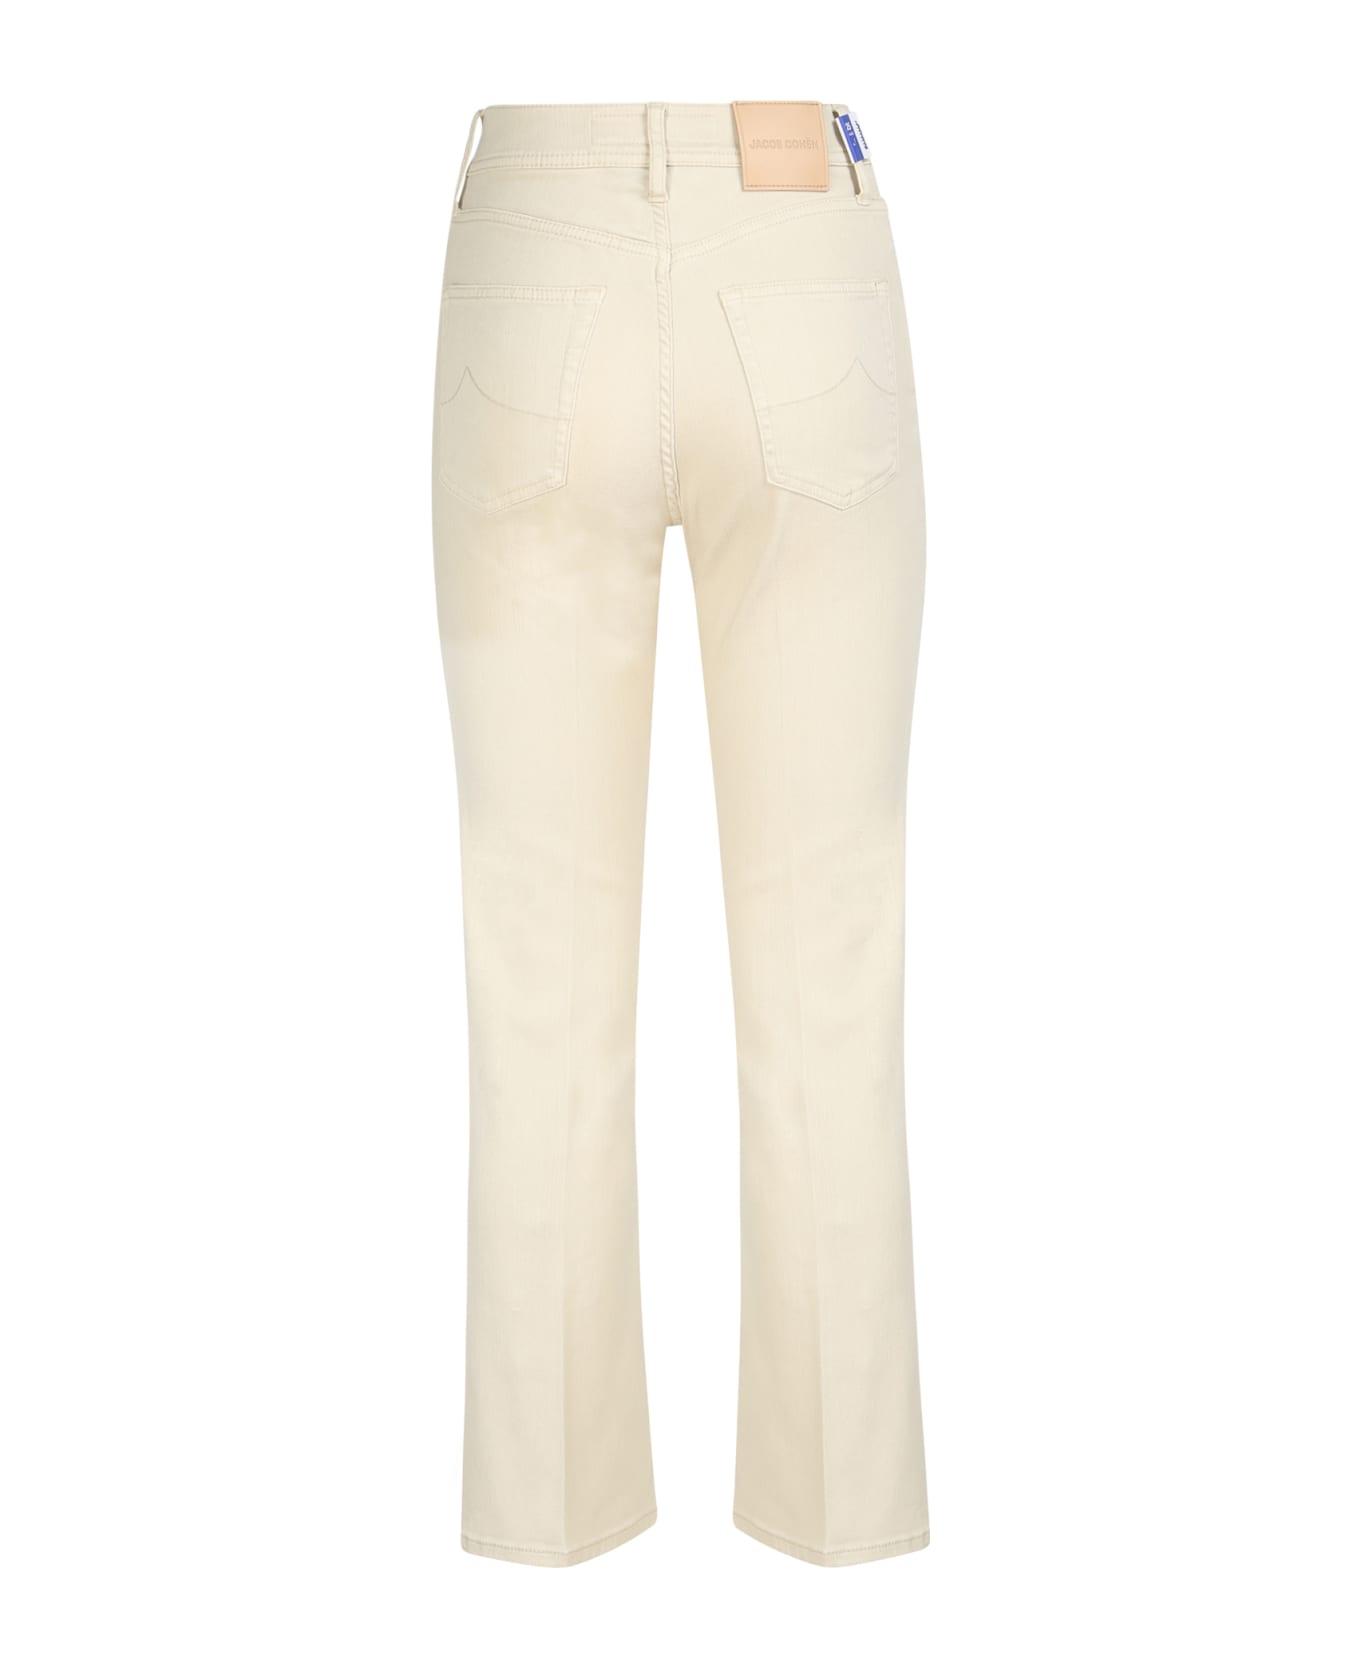 Jacob Cohen Flare Jeans - Beige ボトムス